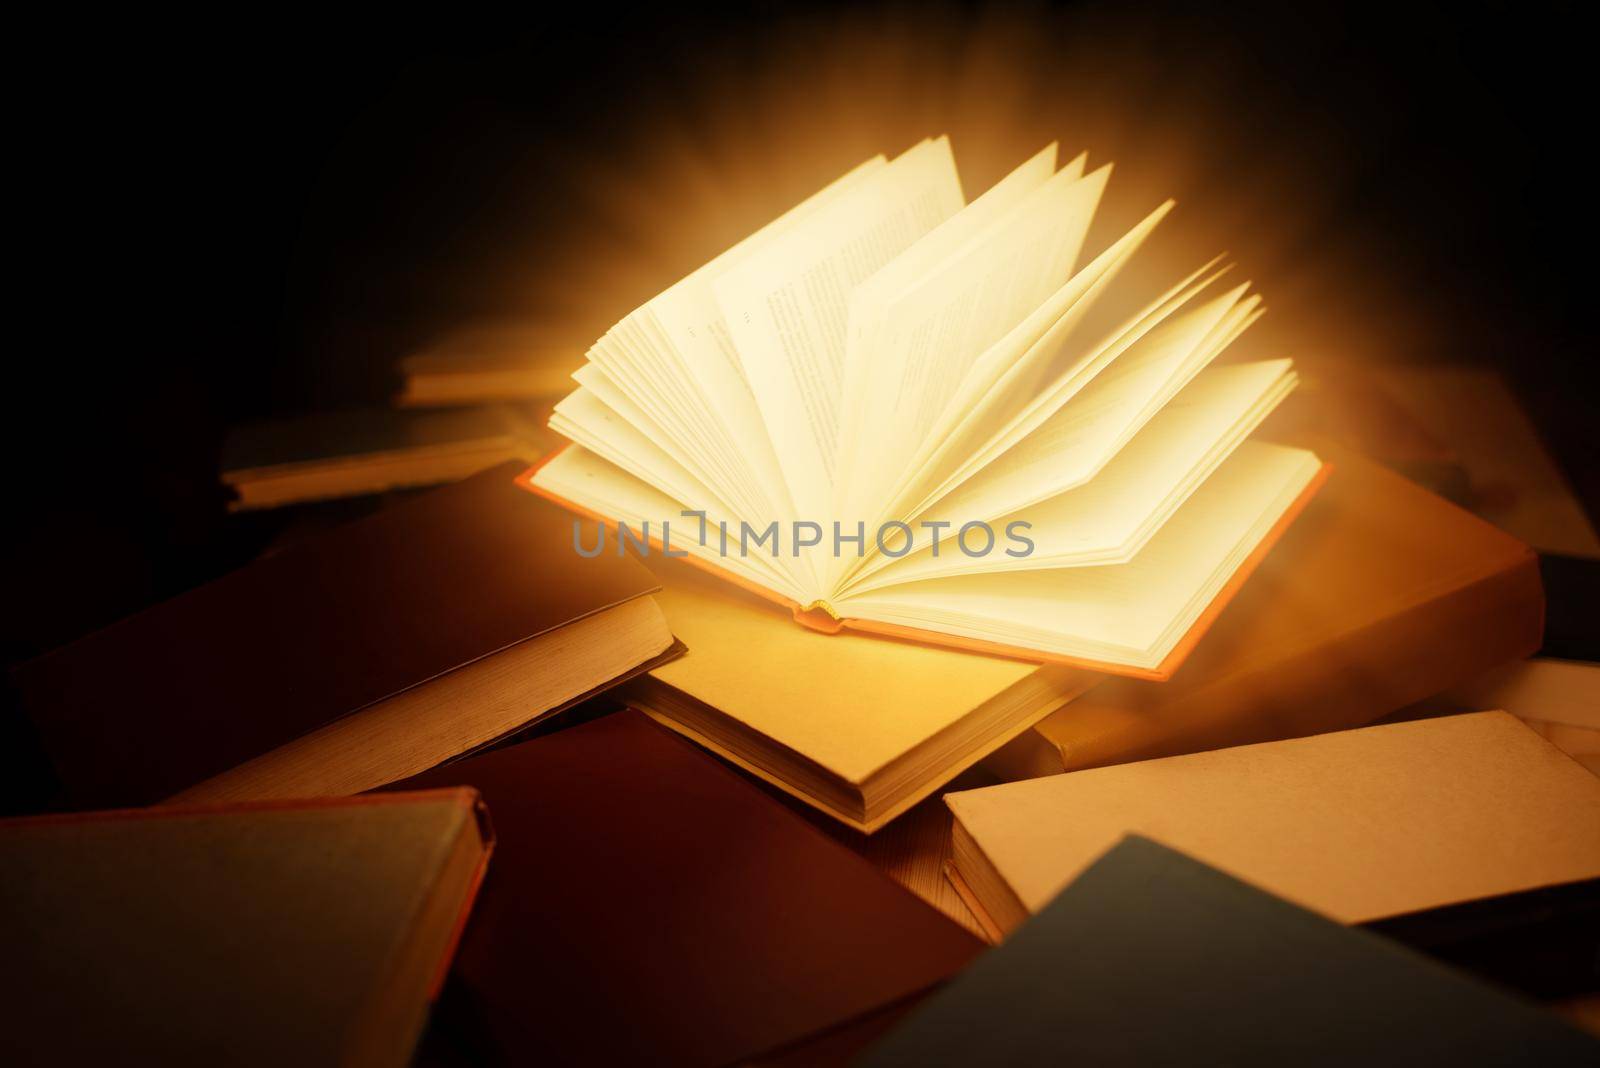 Bright light coming from open book, making image overexposed by VitaliiPetrushenko